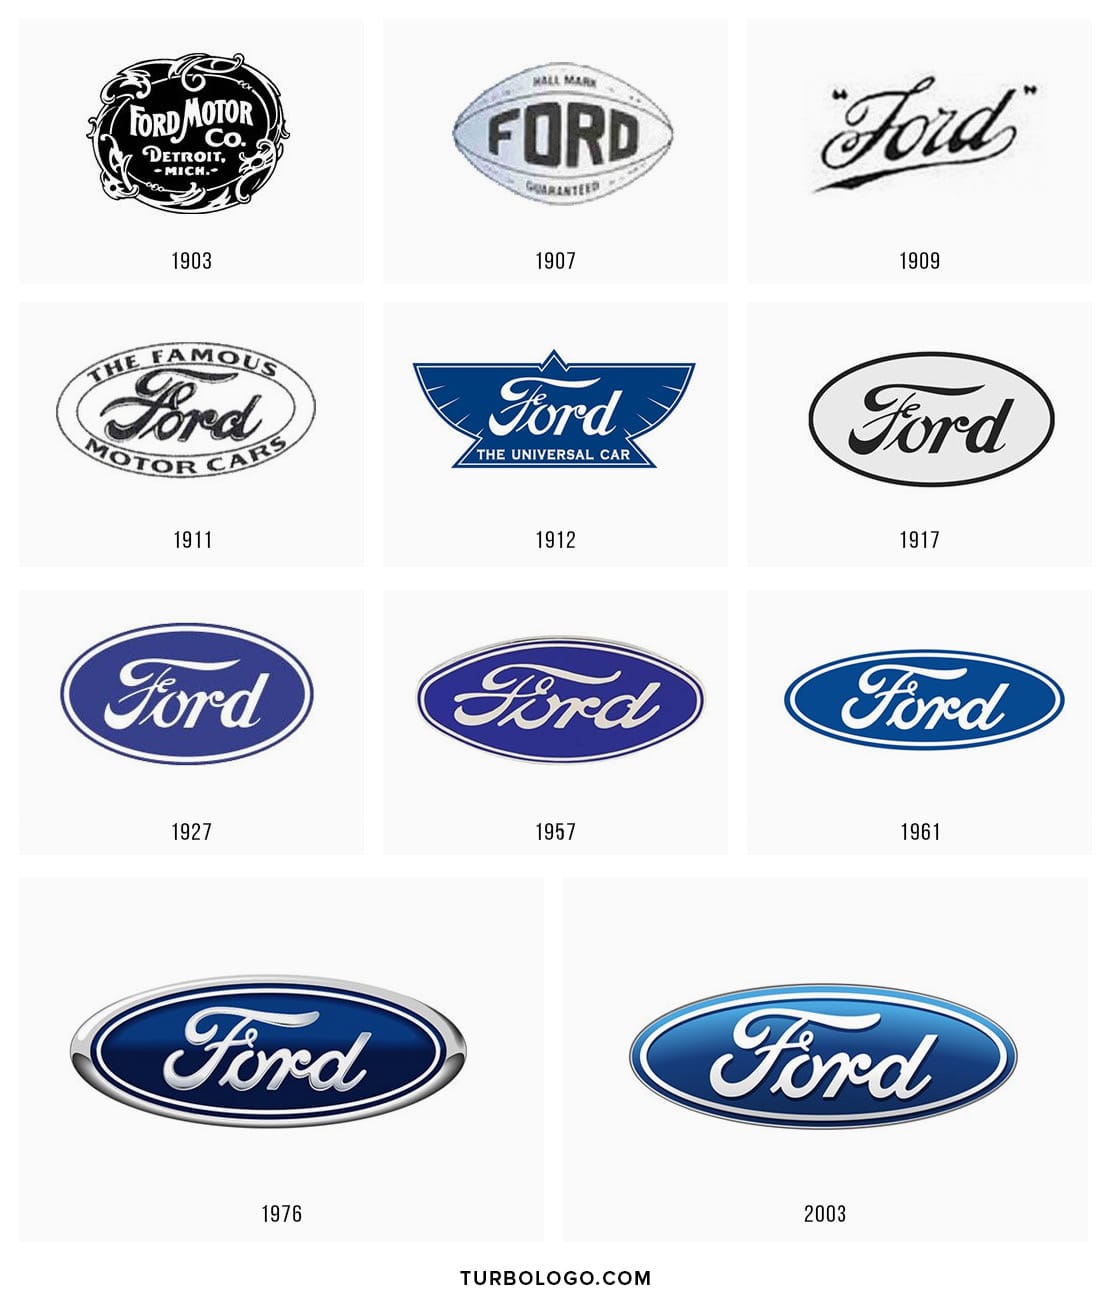 Ford logo - Ford car Symbol, Meaning and History | Turbologo